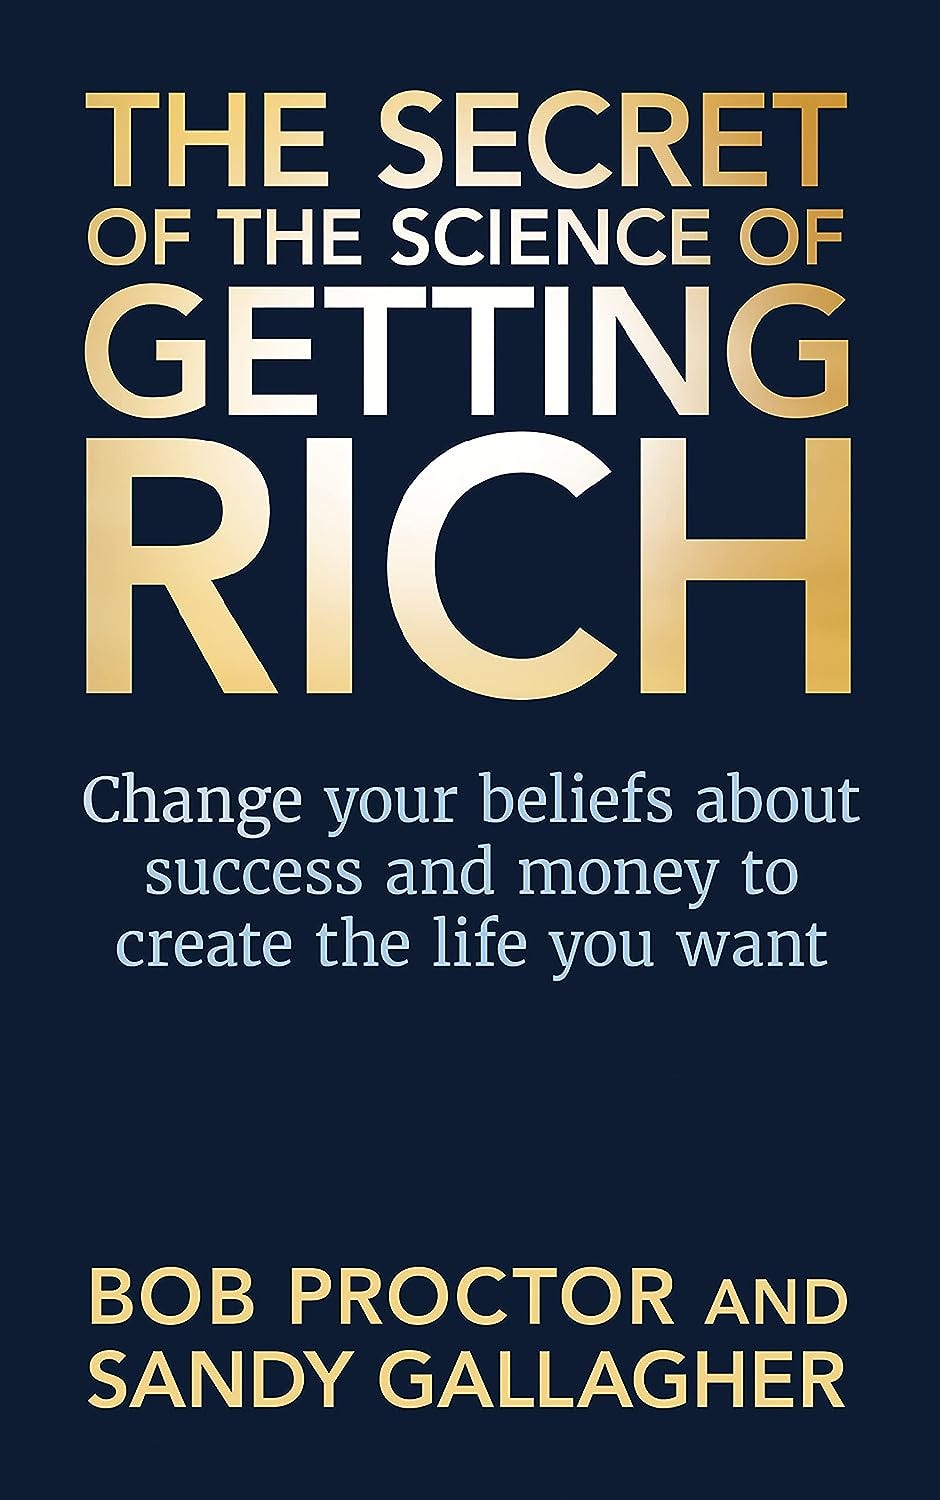 My Personal Thoughts on Bob Proctor's The Secret of The Science of Getting  Rich, by Sophia Phoenix